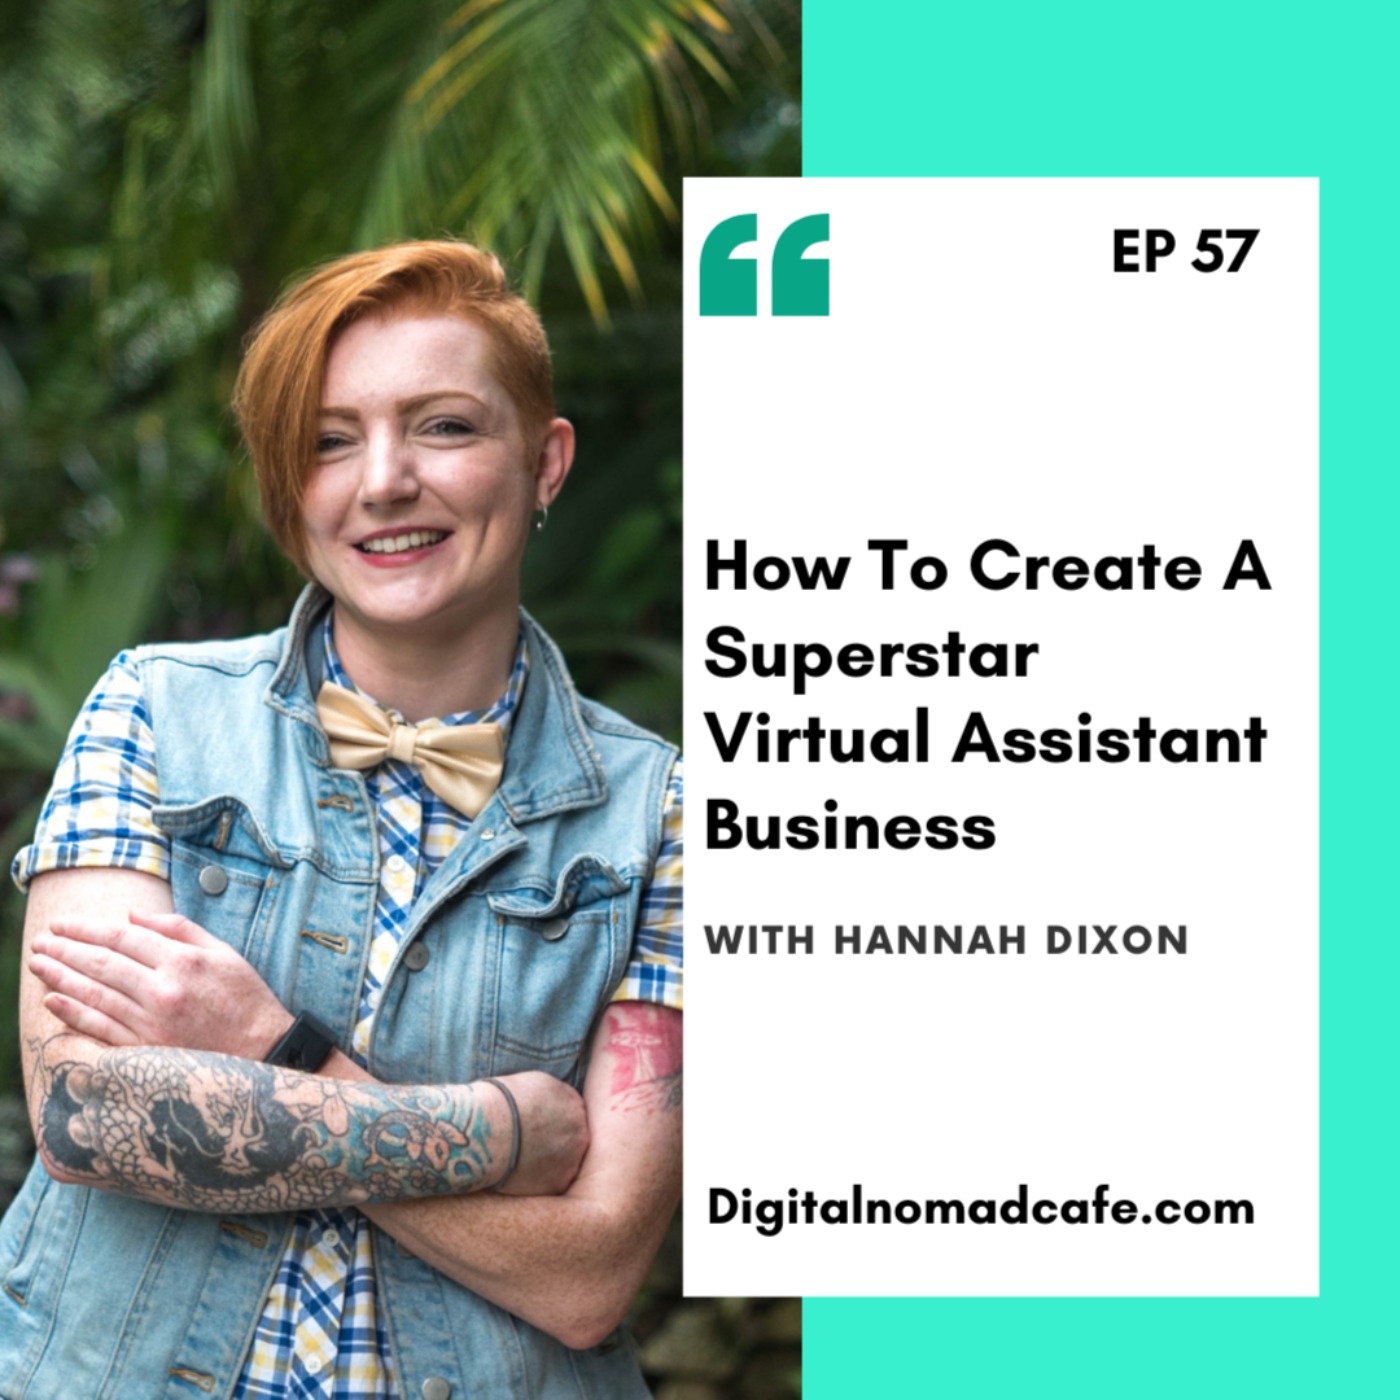 EP57-How To Create A Superstar Virtual Assistant Business with Hannah Dixon